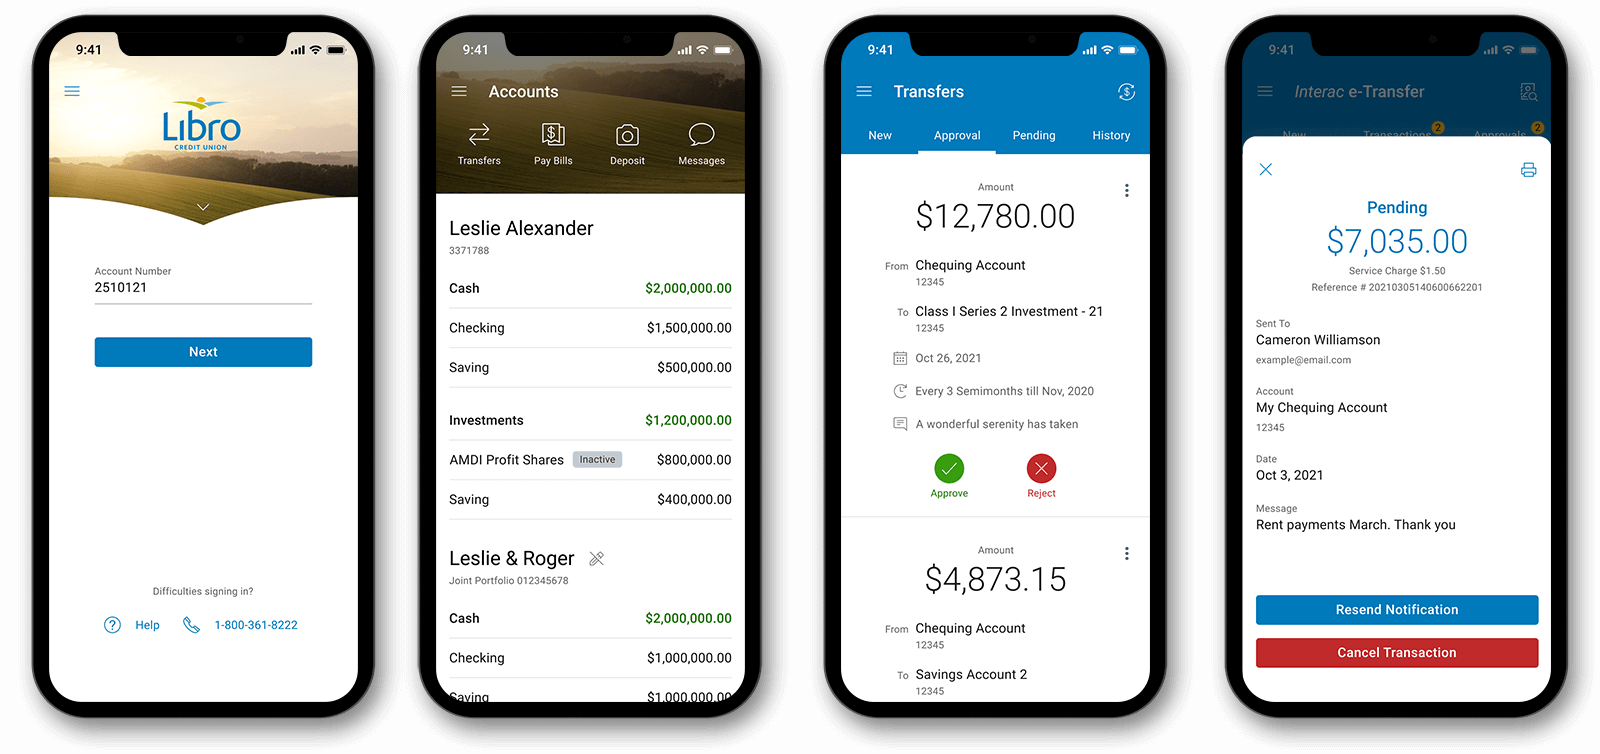 New mobile banking app pages showcasing redesigned UX